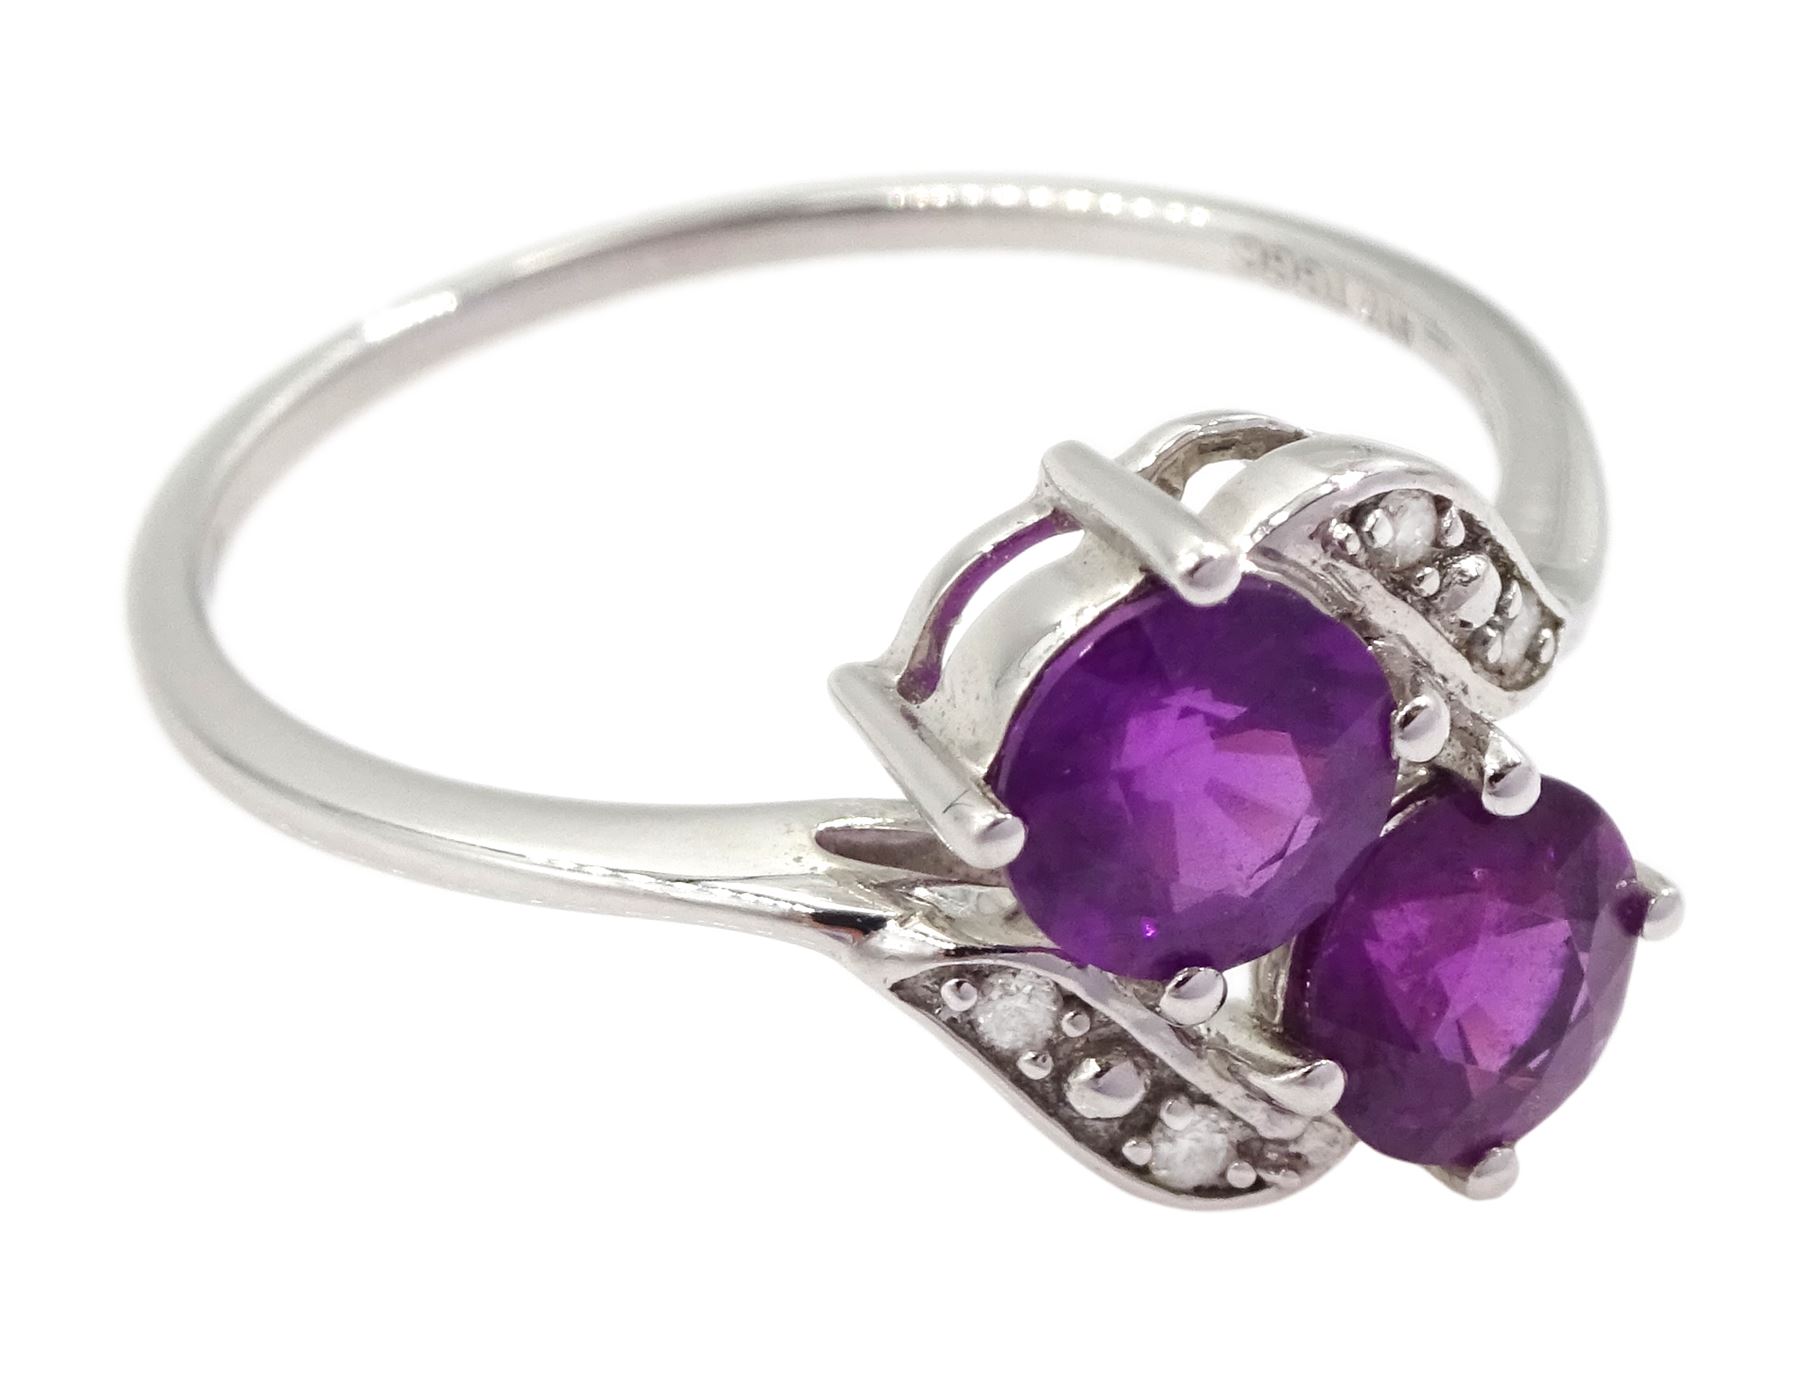 9ct white gold purple garnet and diamond crossover ring - Image 3 of 4